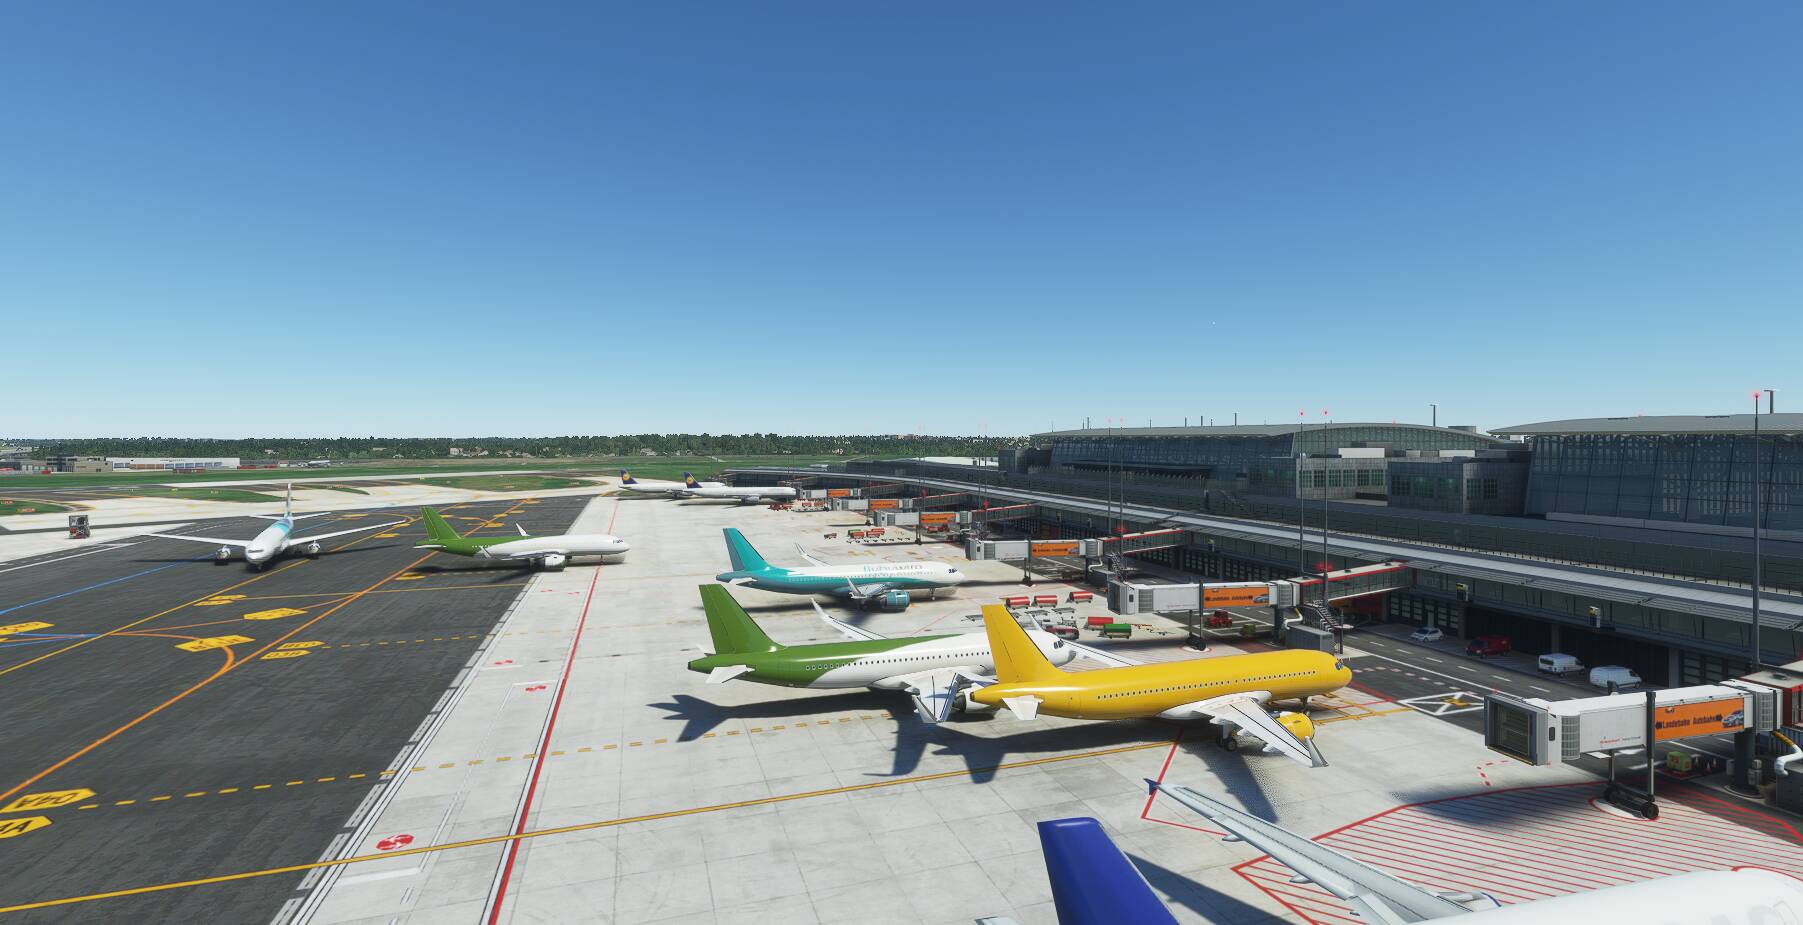 Tutorial] How to get airliners traffic closer to reality with real liveries  - Tools & Utilities - Microsoft Flight Simulator Forums